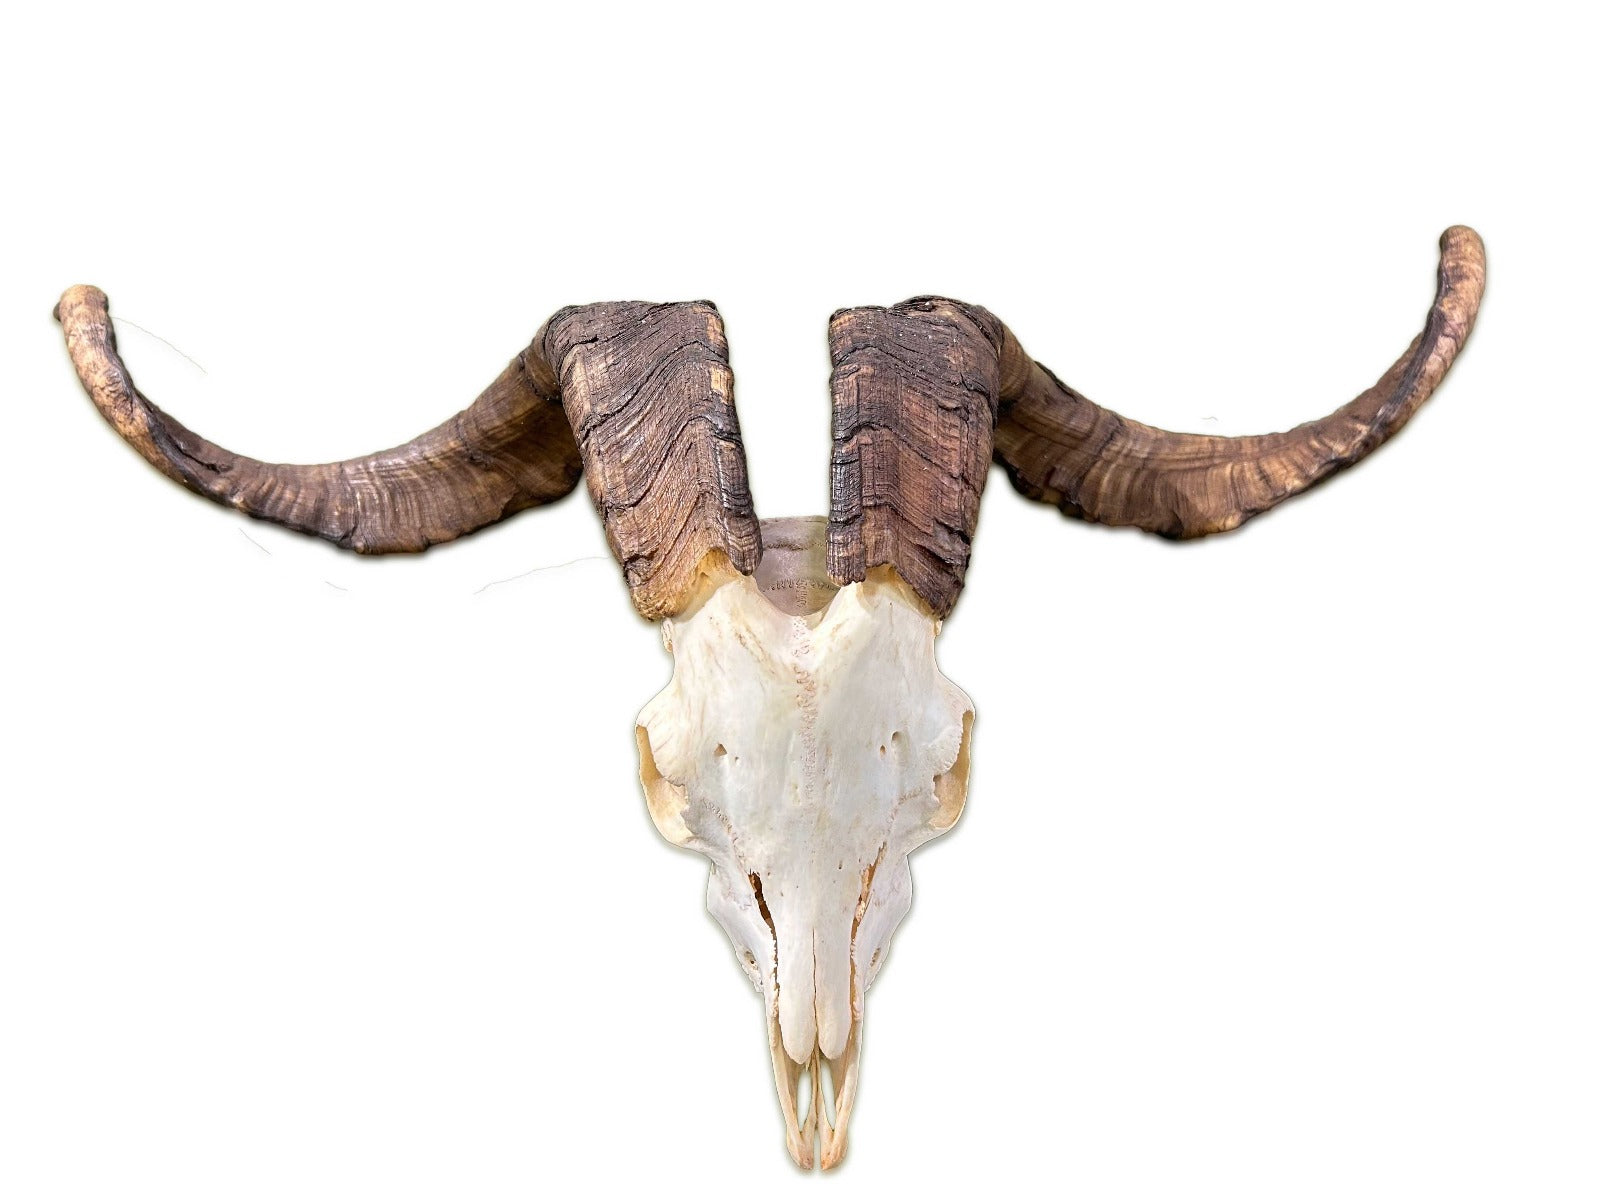 Ram Skull - Real Angora Ram Horns and Skull - Approx Size: 21LX35WX10D inches - Made for Wall Hanging with Metal Bracket on the Back